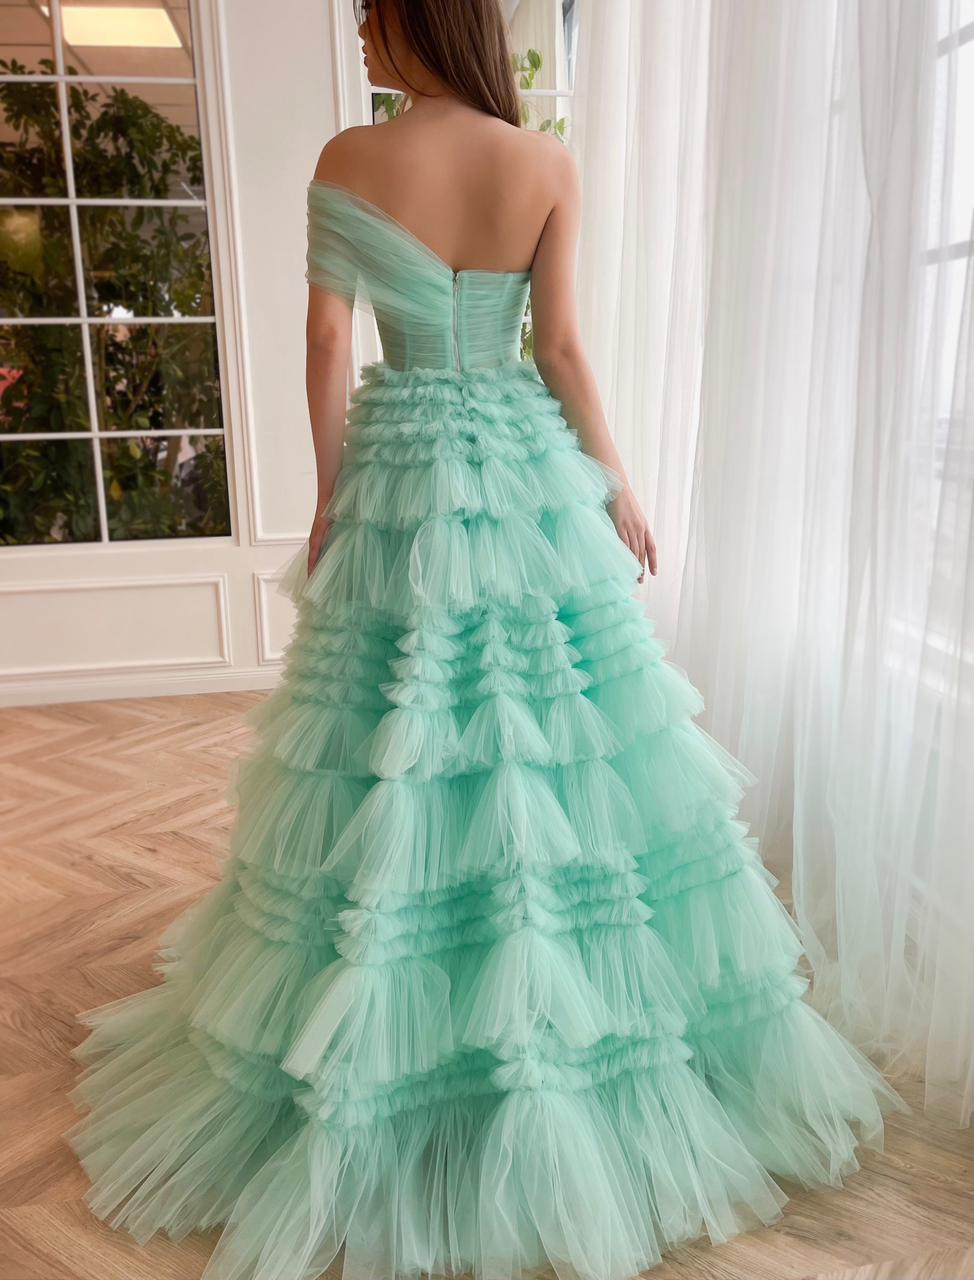 Turquoise A-Line dress with one shoulder sleeve and ruffles